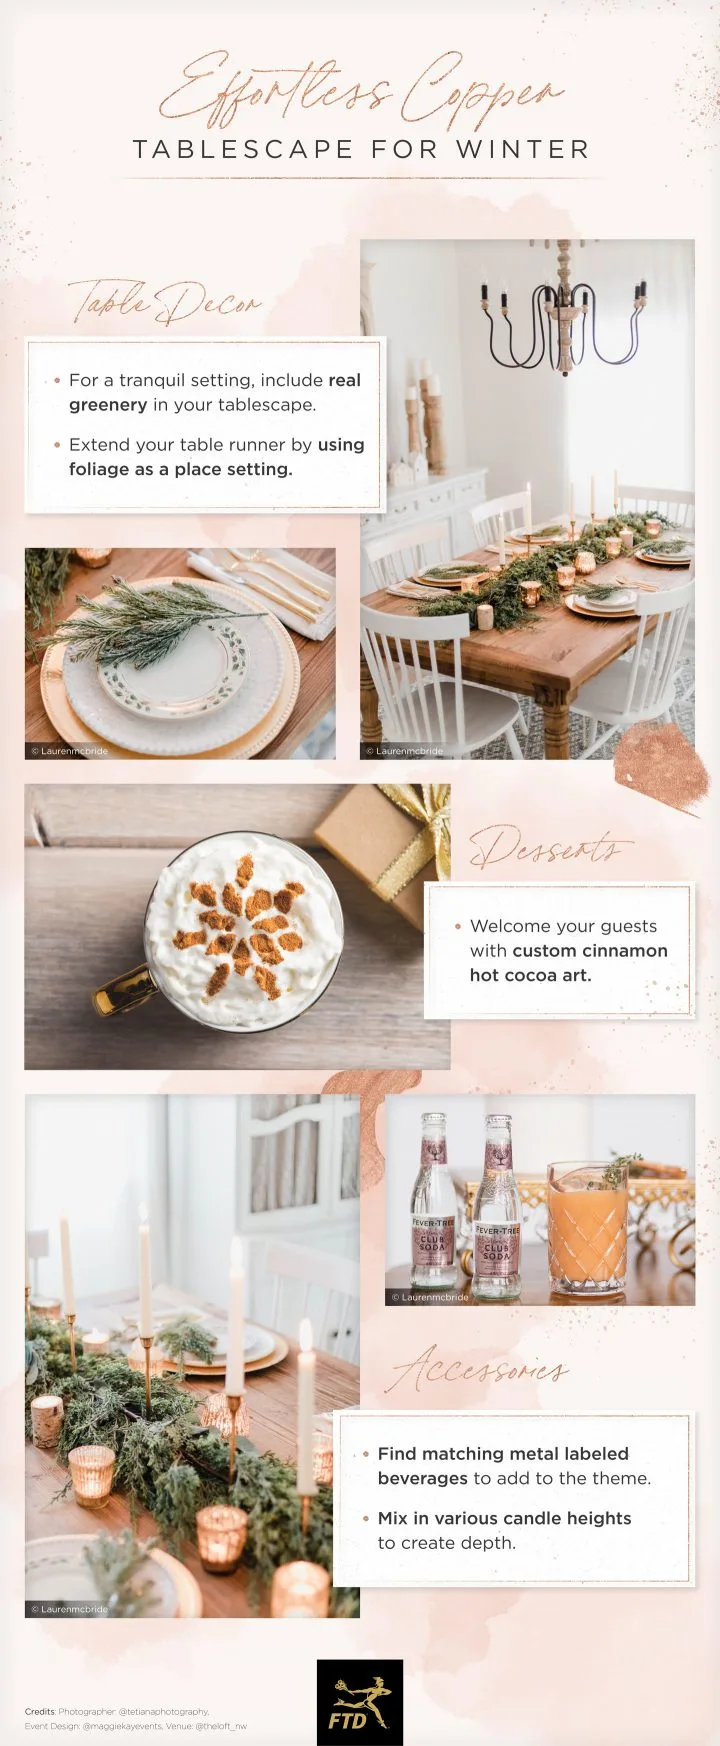 Mixed Metal Holiday Tablescapes + Printable Pie and Hot Chocolate Stencils